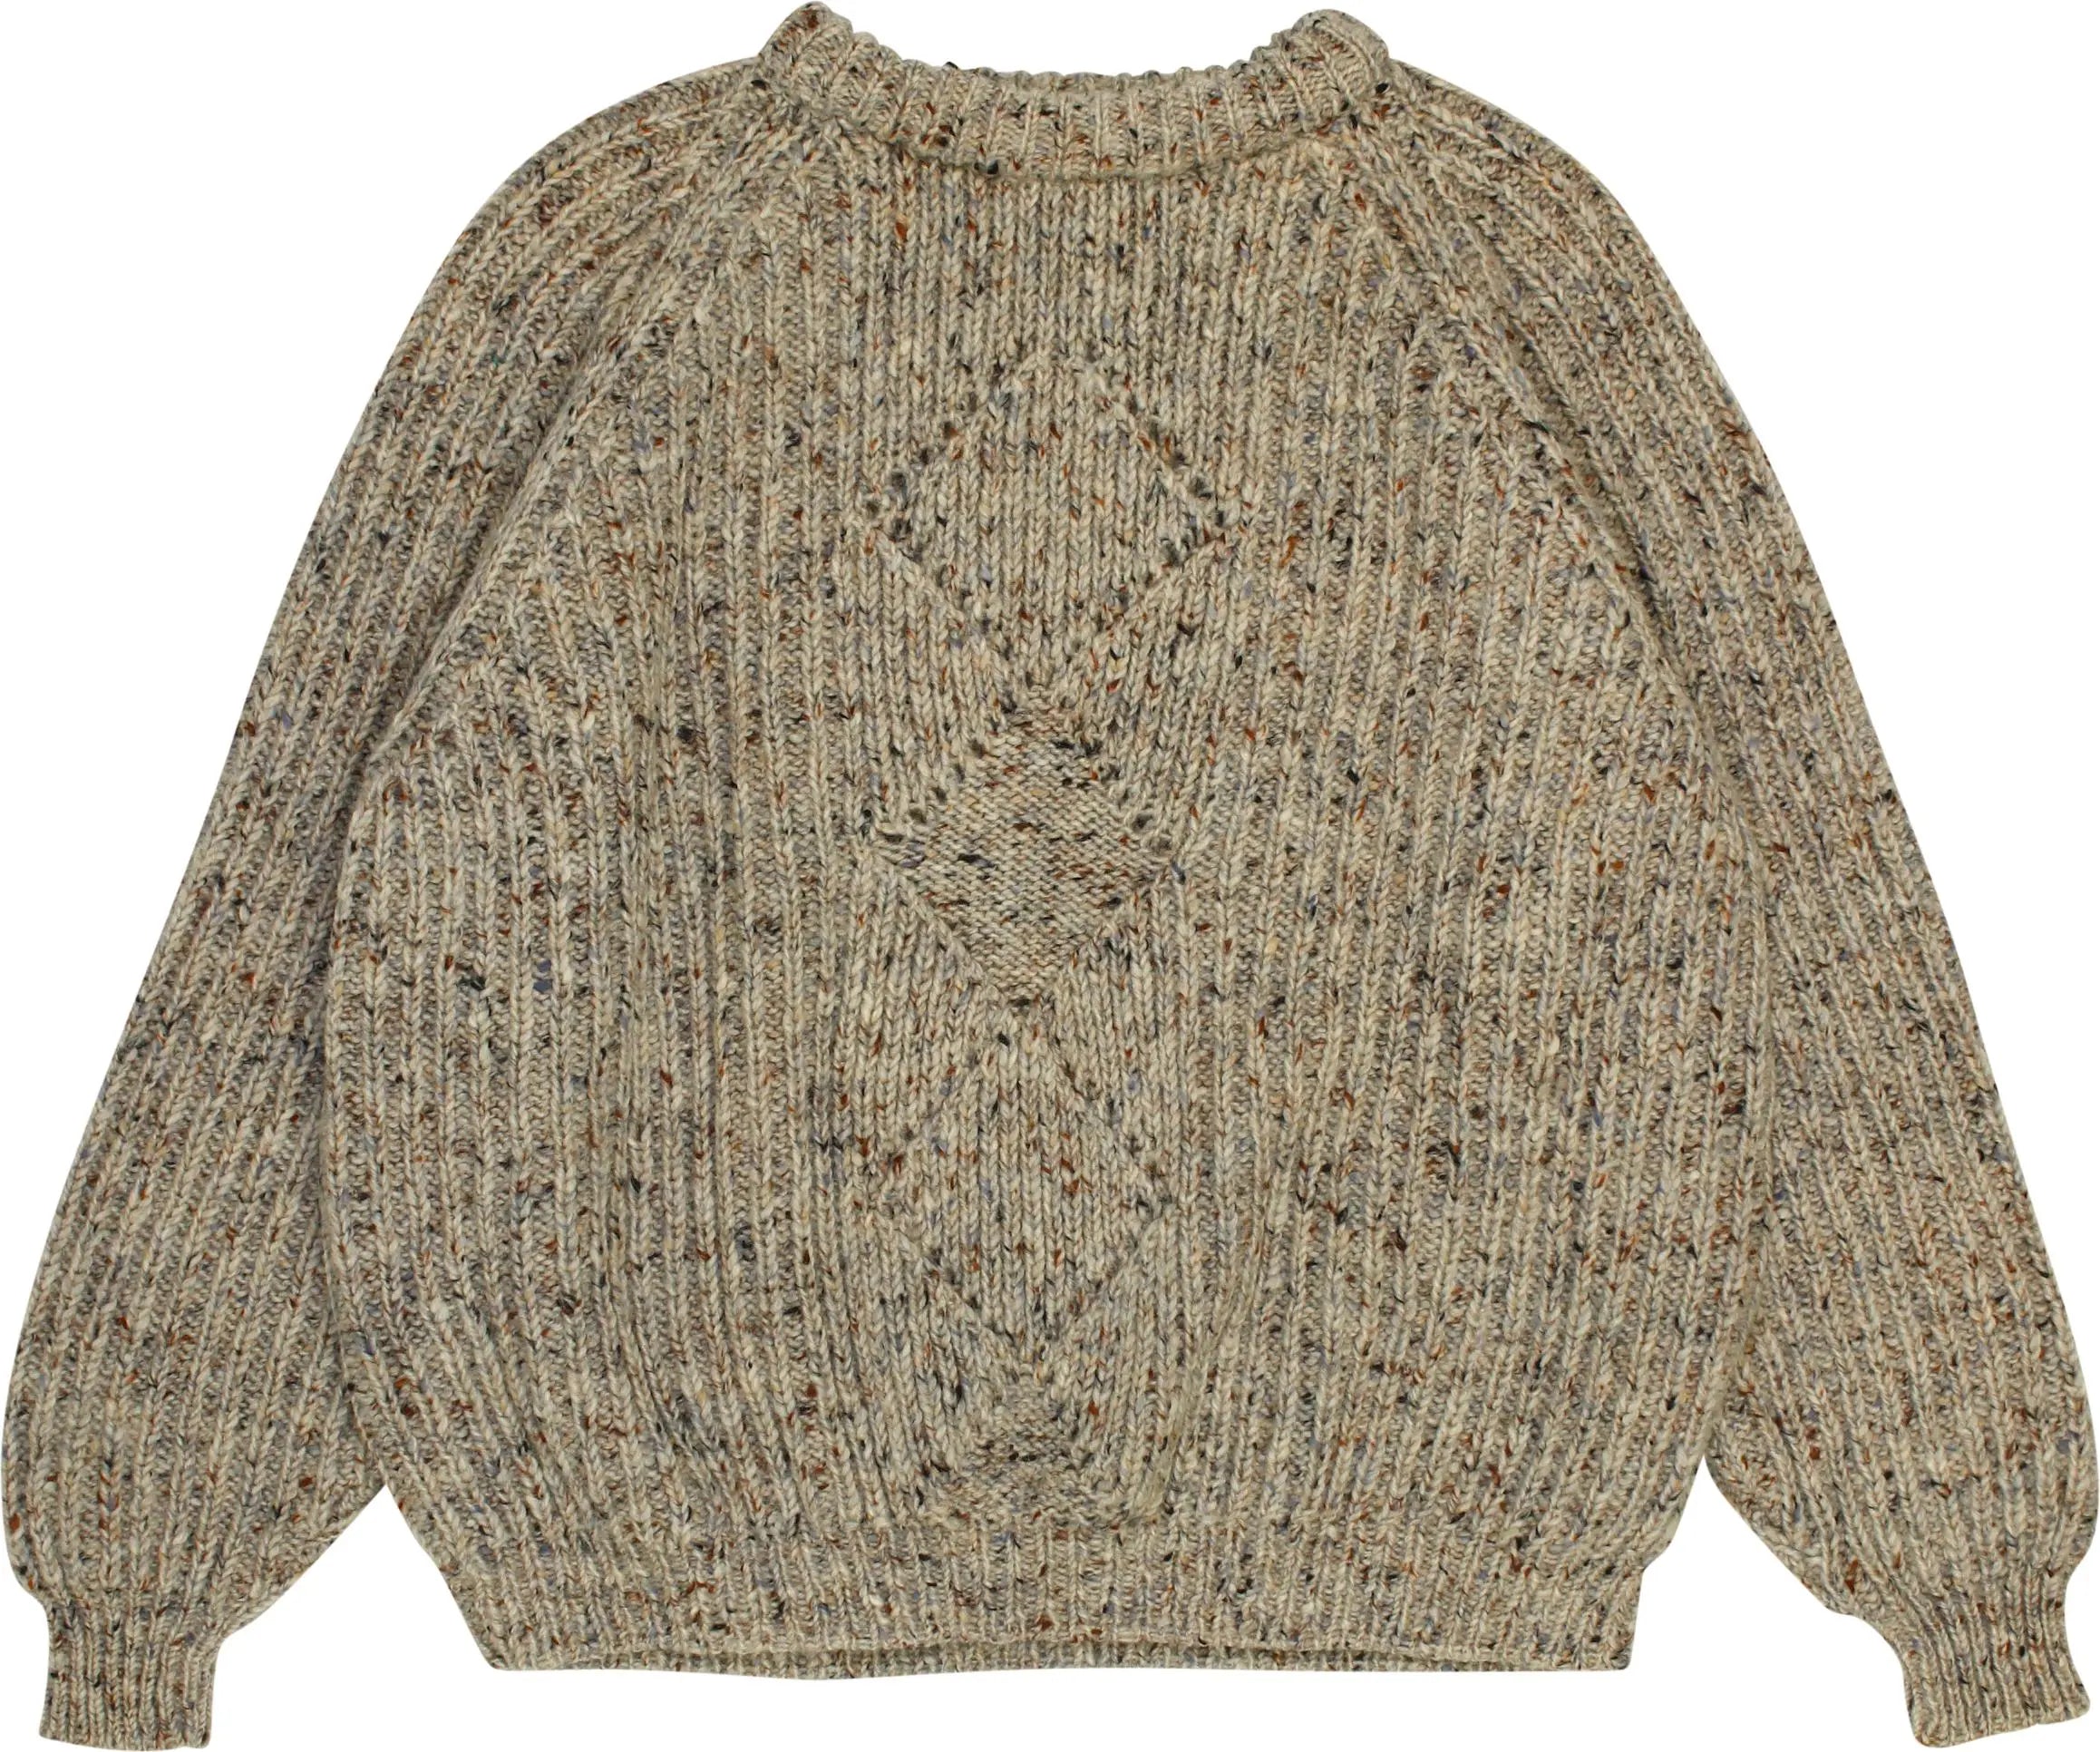 John Molloy - Irish Wool Knit Jumper- ThriftTale.com - Vintage and second handclothing